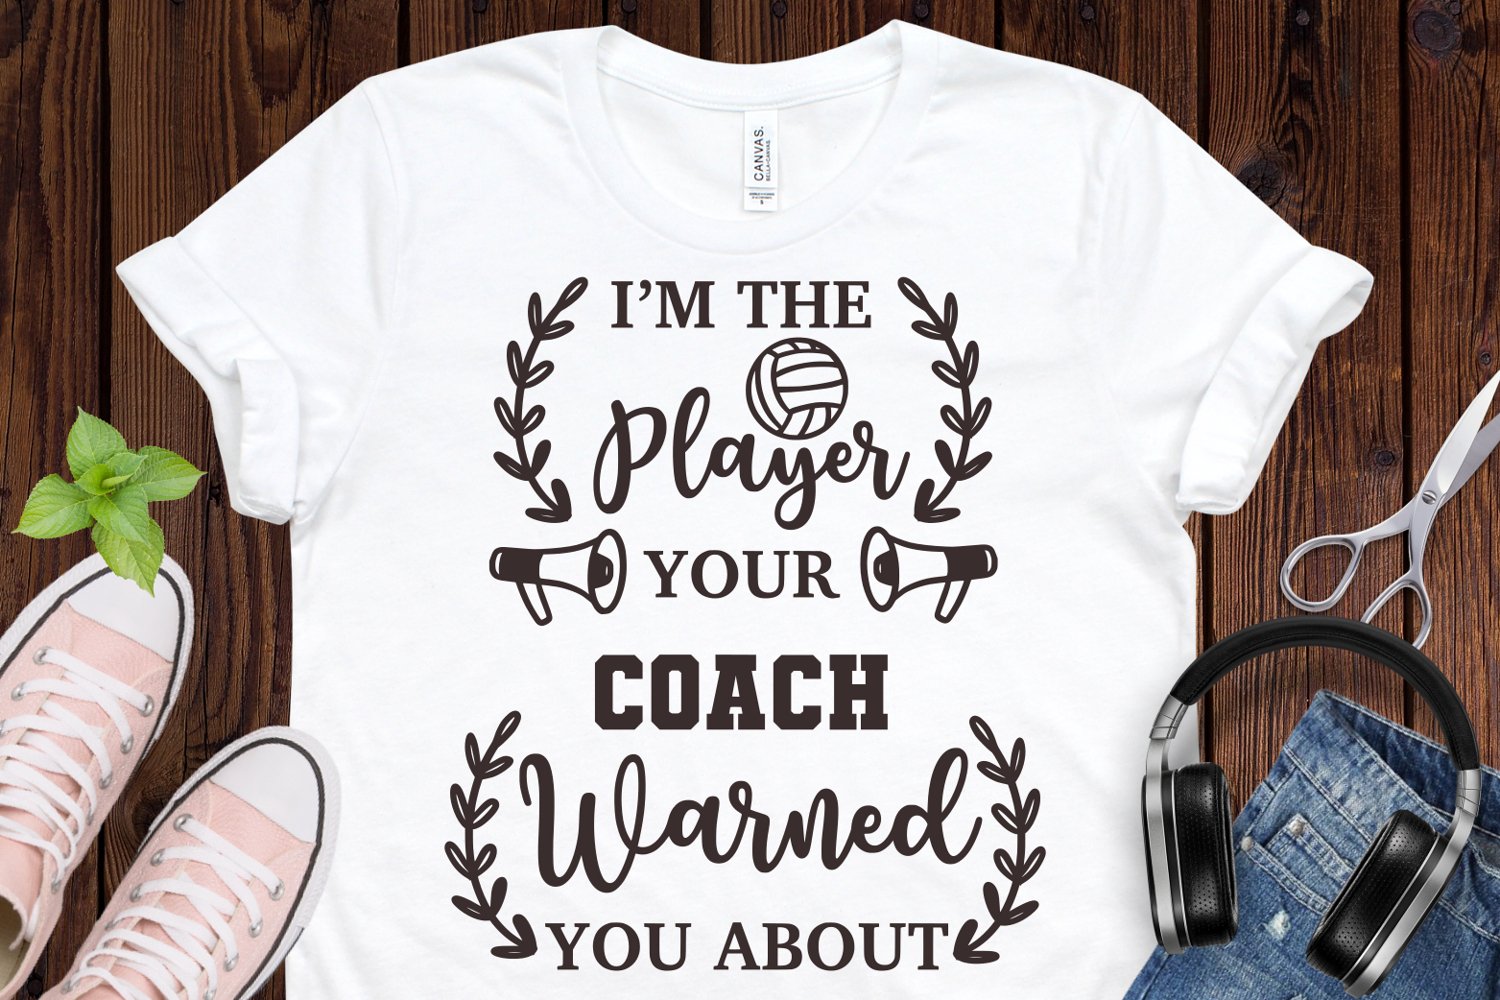 I'm the player your coach warned you about - t-shirt design.